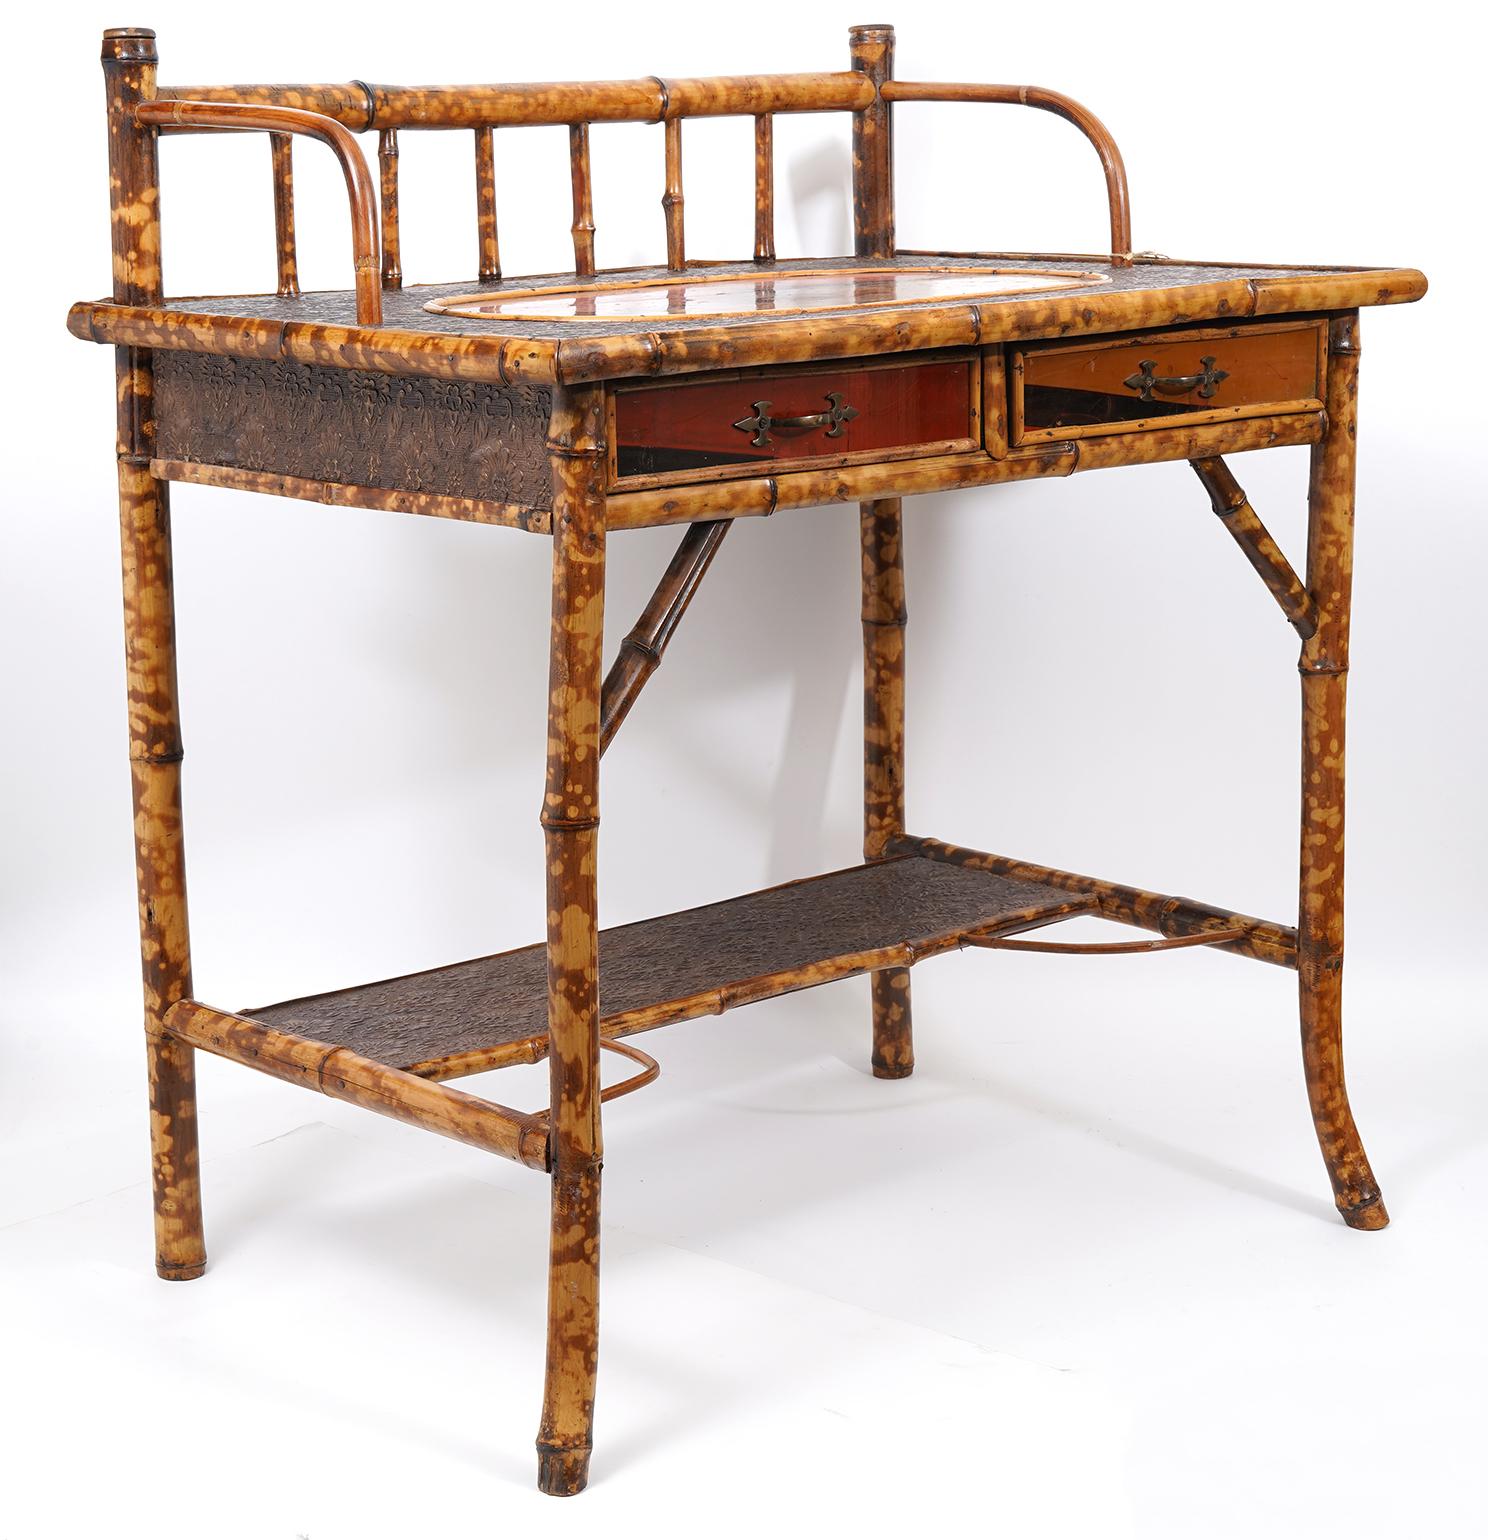 20th Century English Bamboo and Lacquer Two Tier Japanned Writing Desk, Early 20th C.